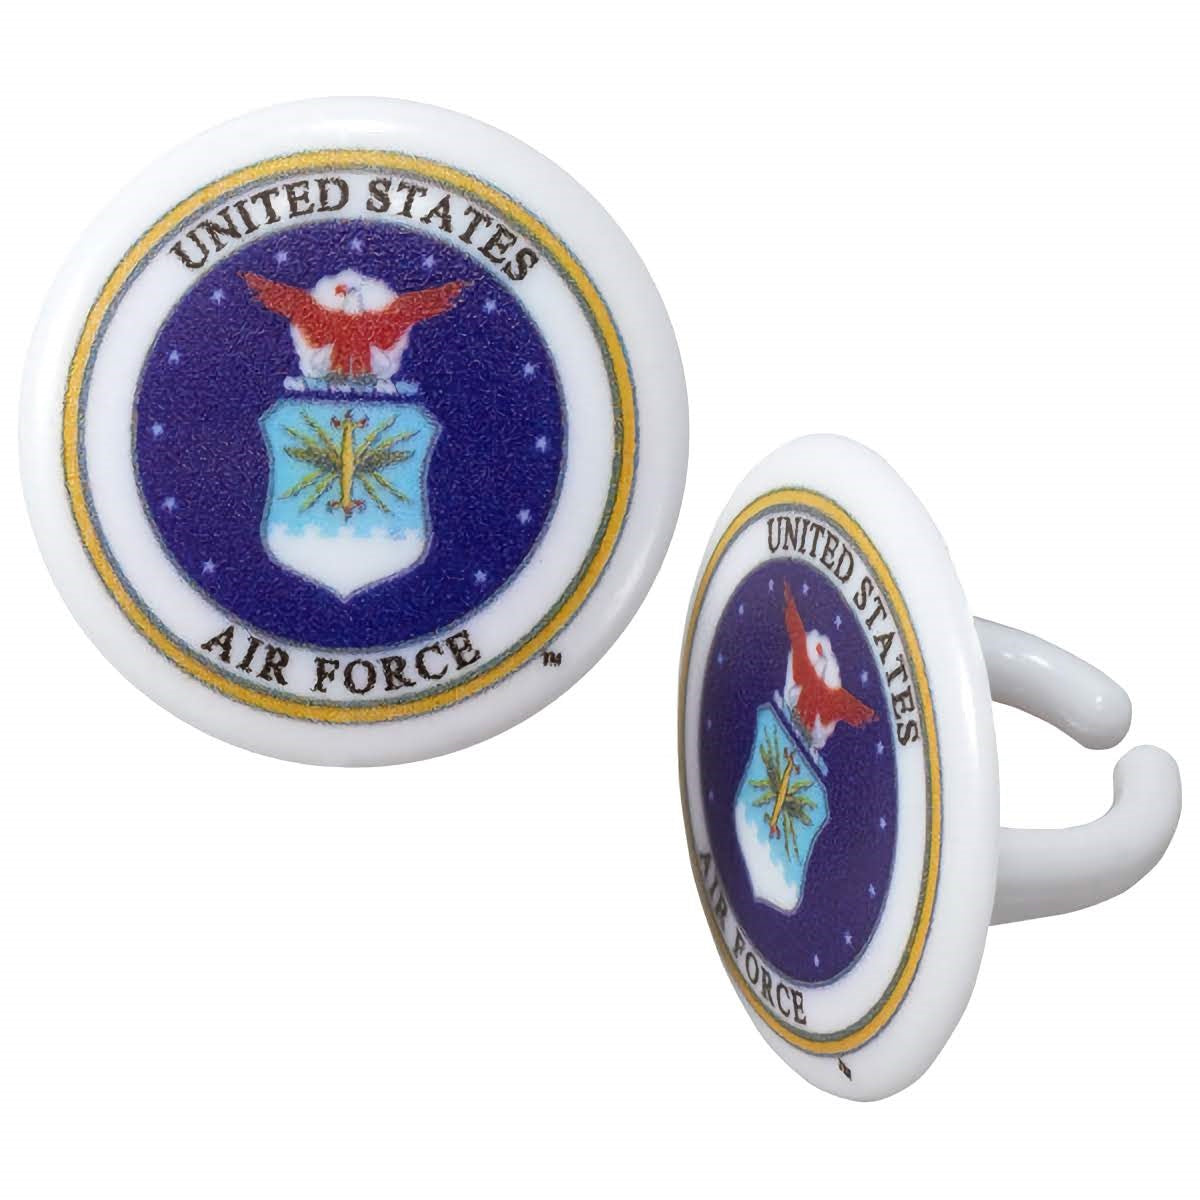 United States Air Force cupcake topper rings, featuring an intricately designed emblem with an eagle, stars, and blue background, suitable for Air Force retirement or celebration cakes.